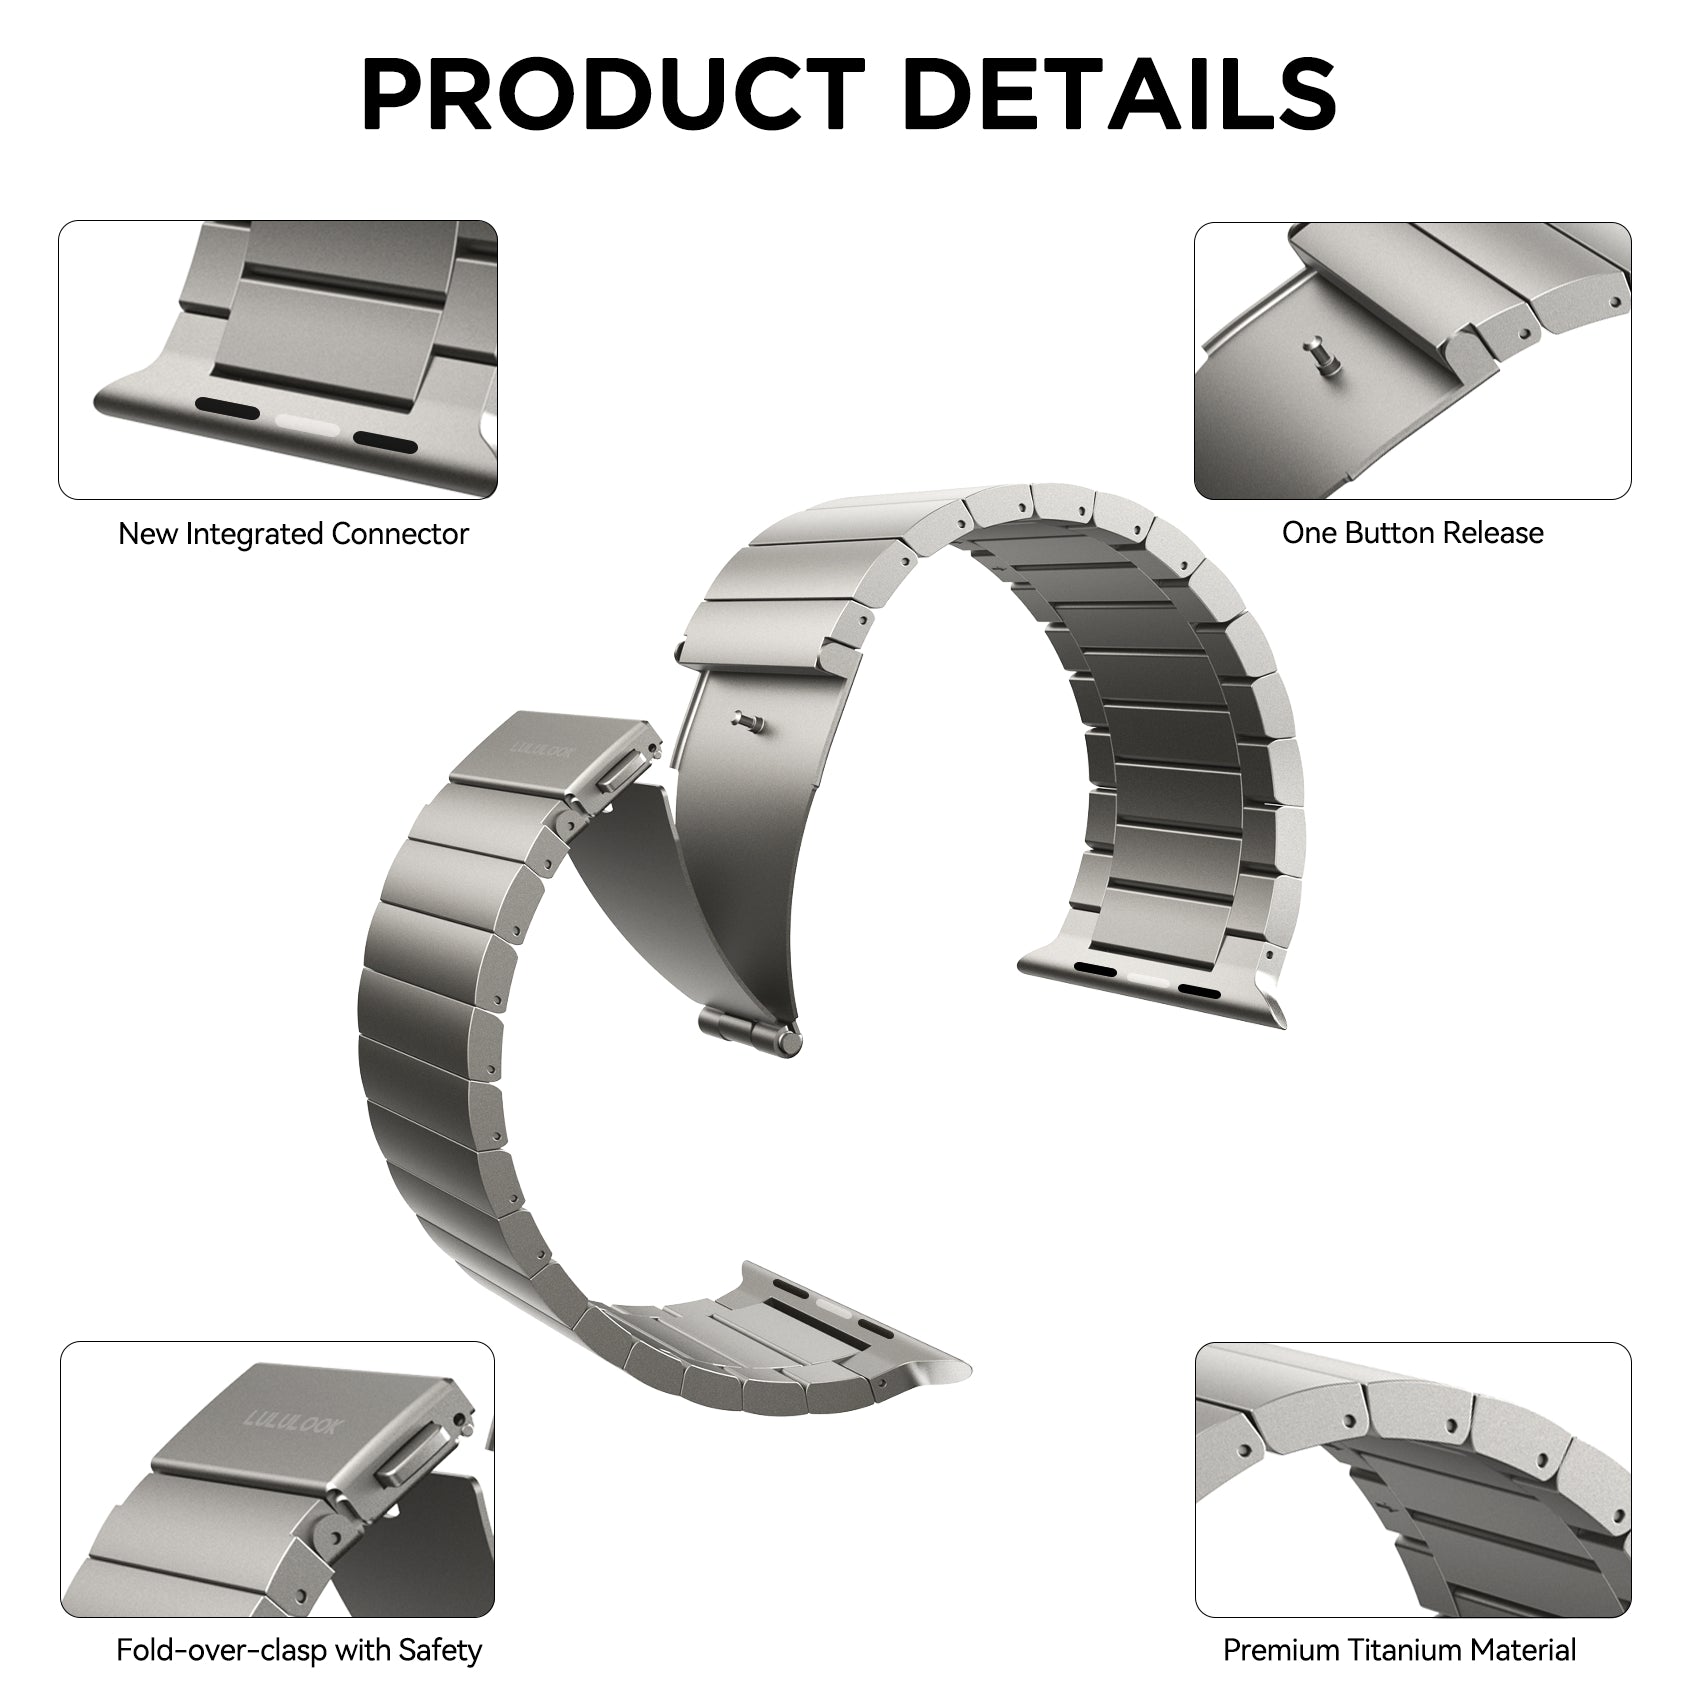 Lululook Titanium Link Band with Magnetic Clasp for Apple Watch Ultra -  Lululook Official